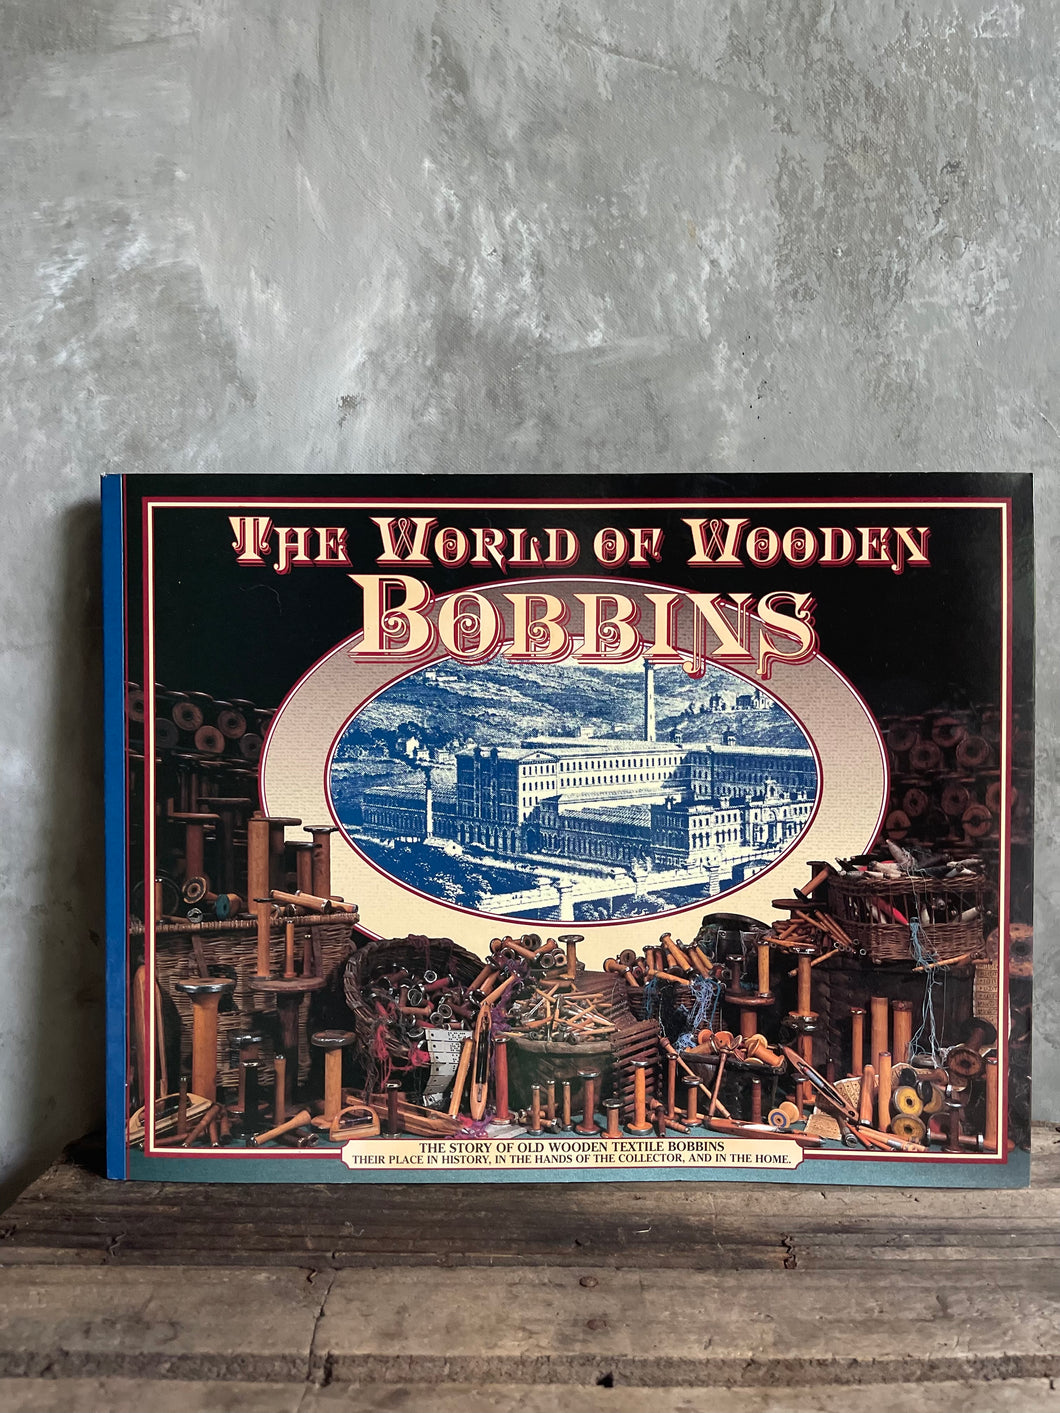 The World Of Wooden Bobbins Book - Concise Information Throughout History.